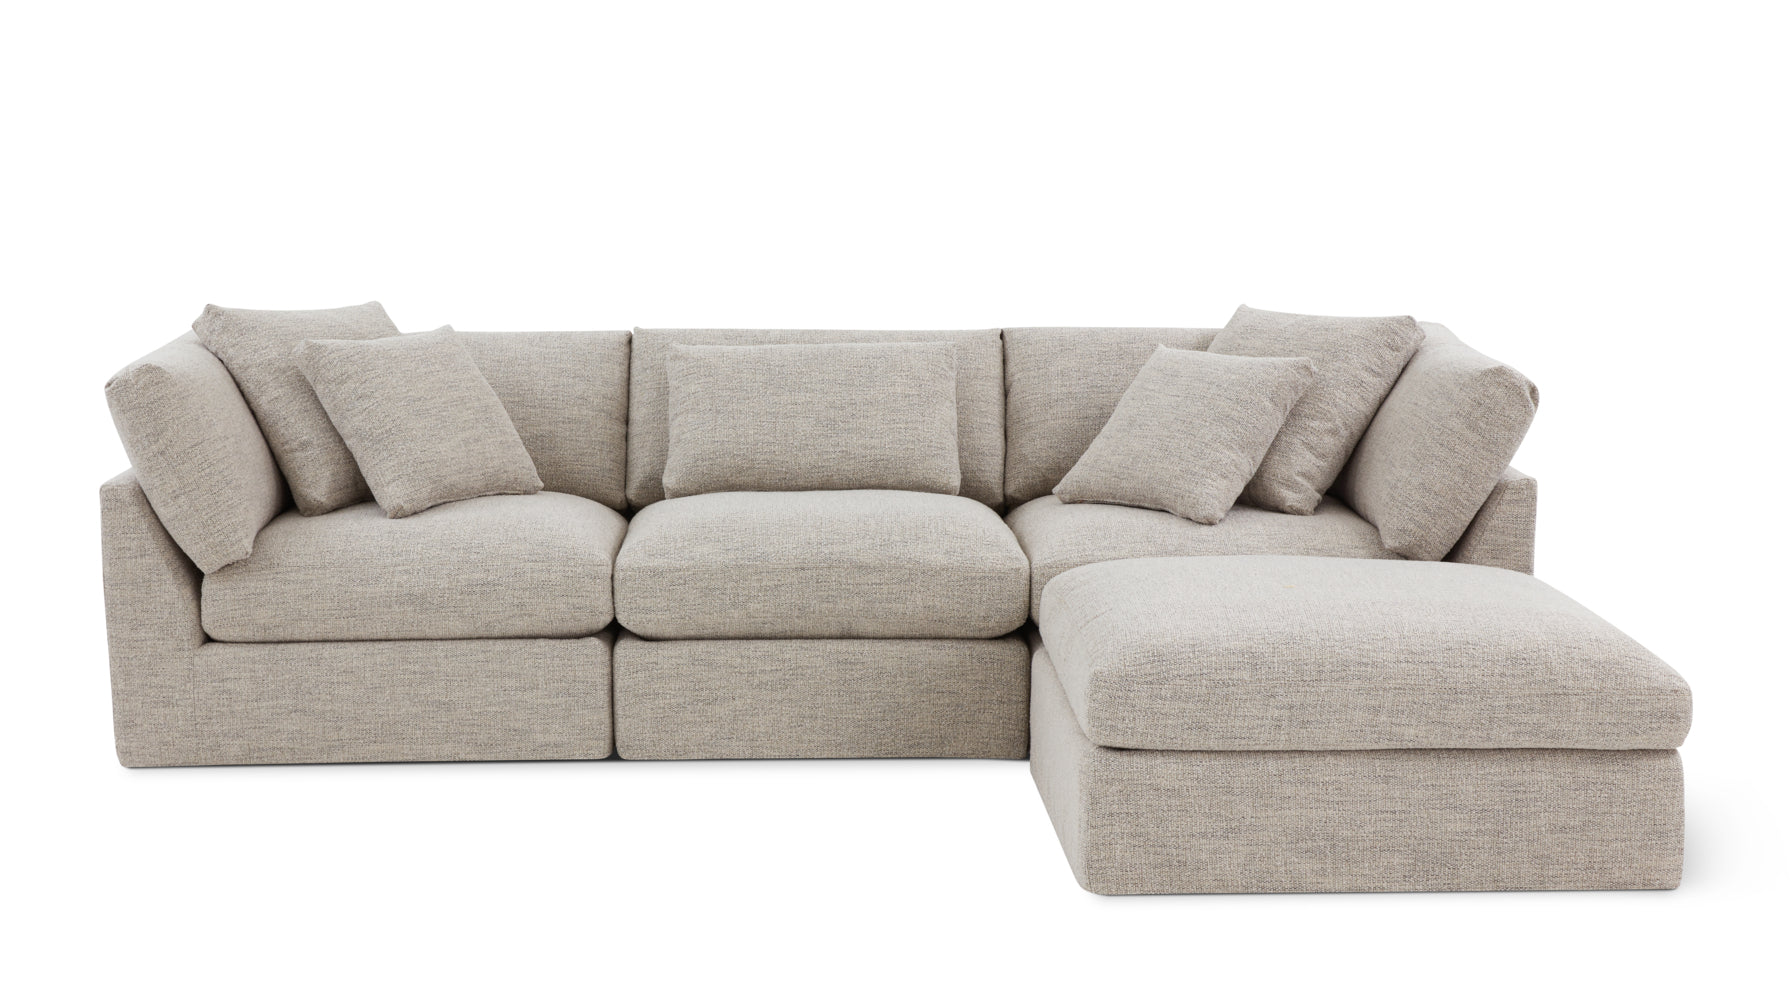 Get Together™ 4-Piece Modular Sectional, Large, Oatmeal - Image 1